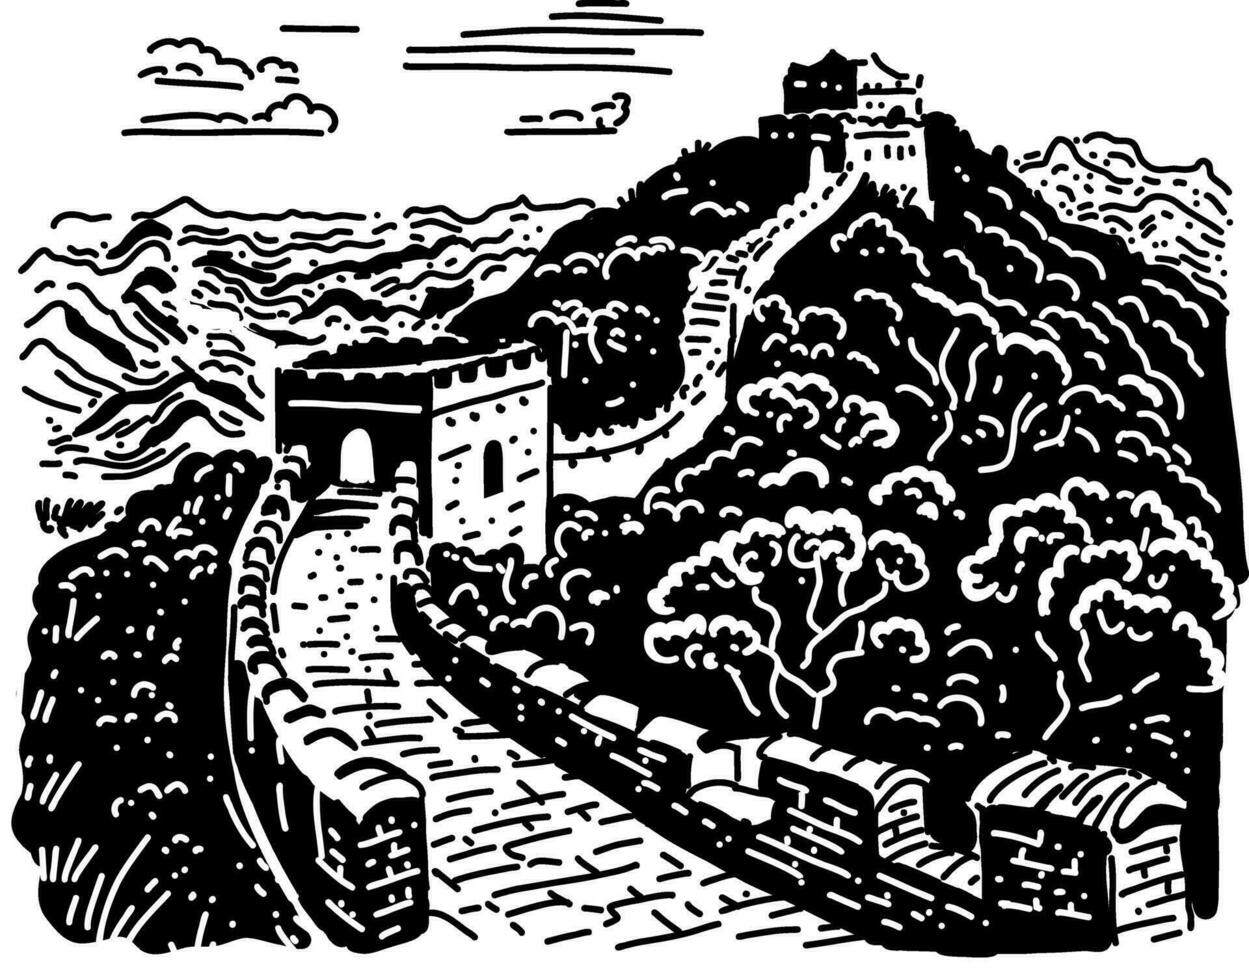 The Great Wall of China in a natural landscape. Vector illustration in engraving style.